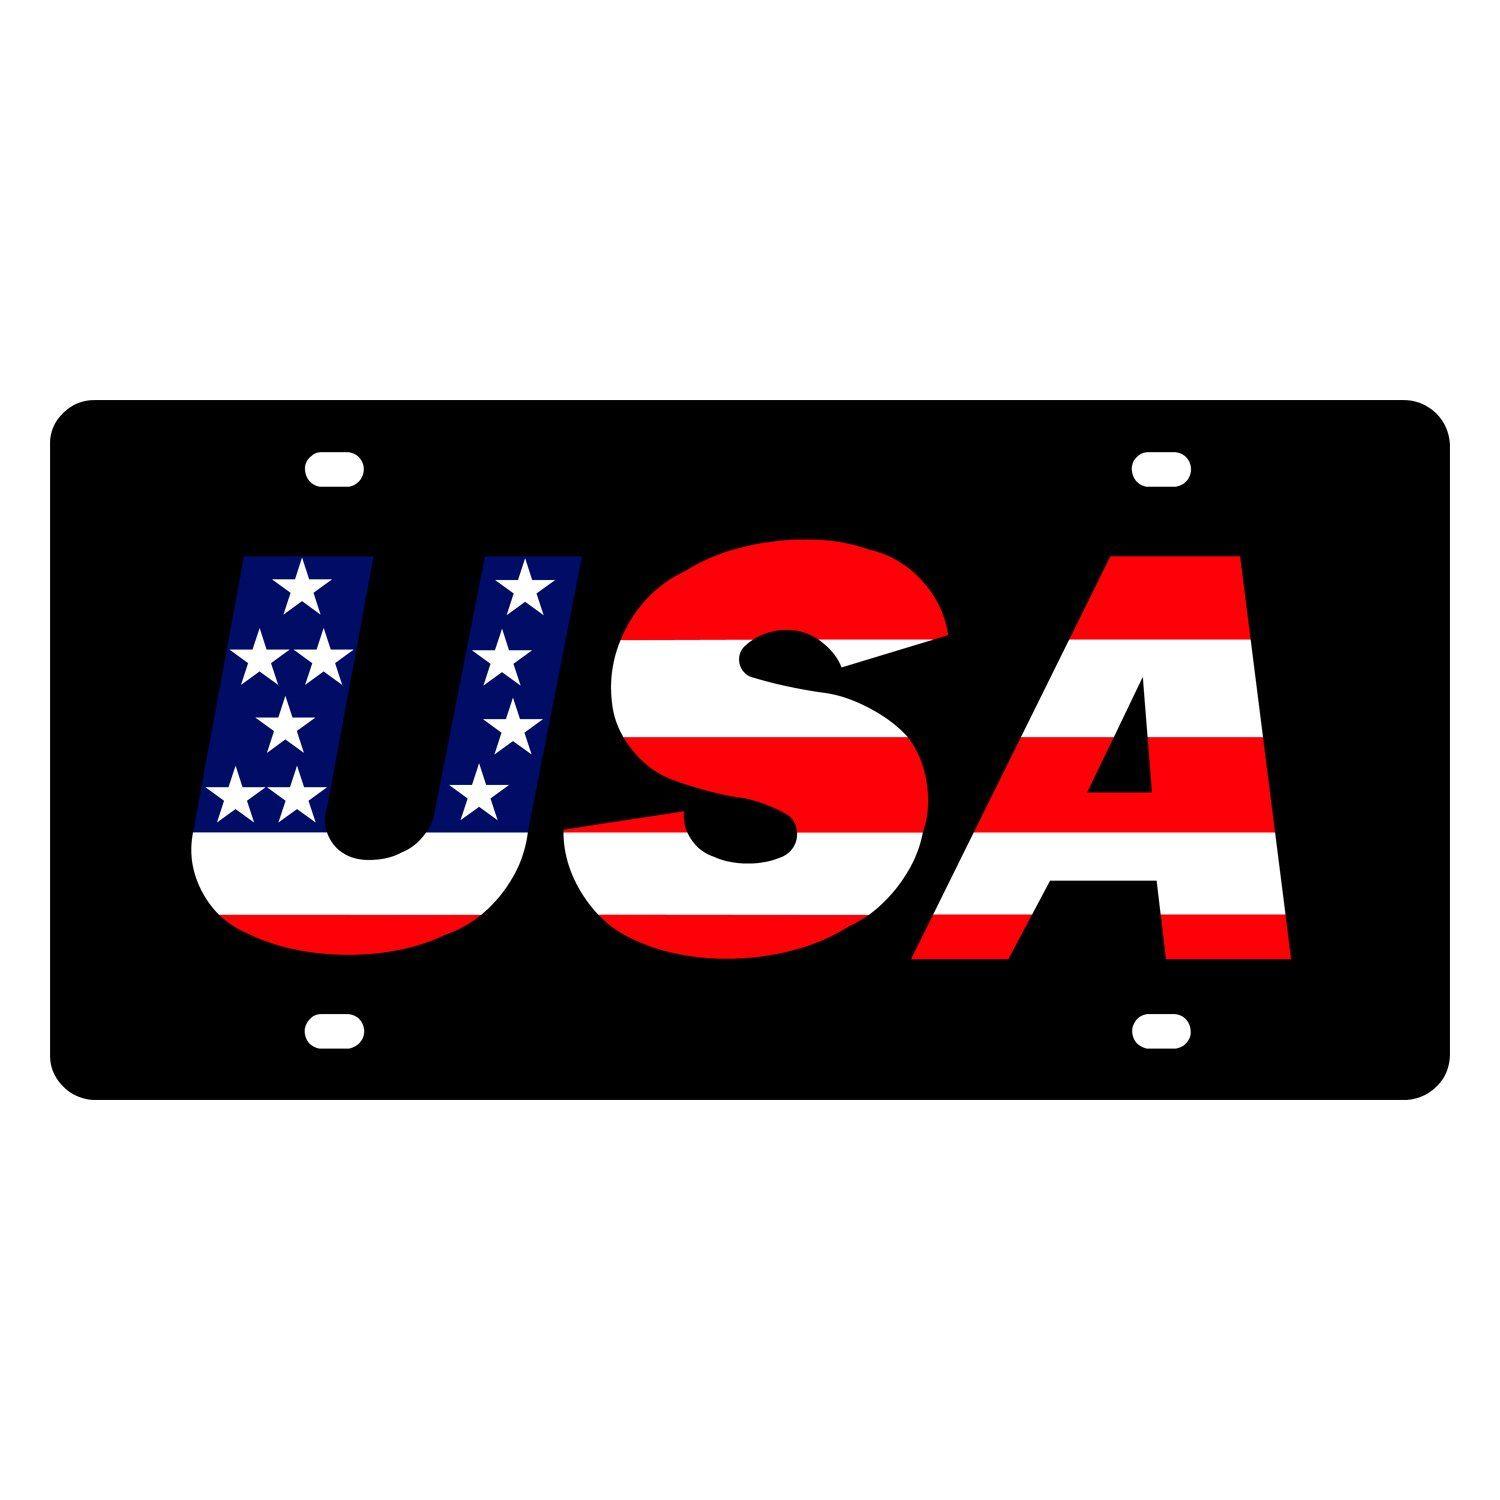 Red White and Blue Brand Logo - Eurosport Daytona® - LSN License Plate with USA Red / White / Blue ...